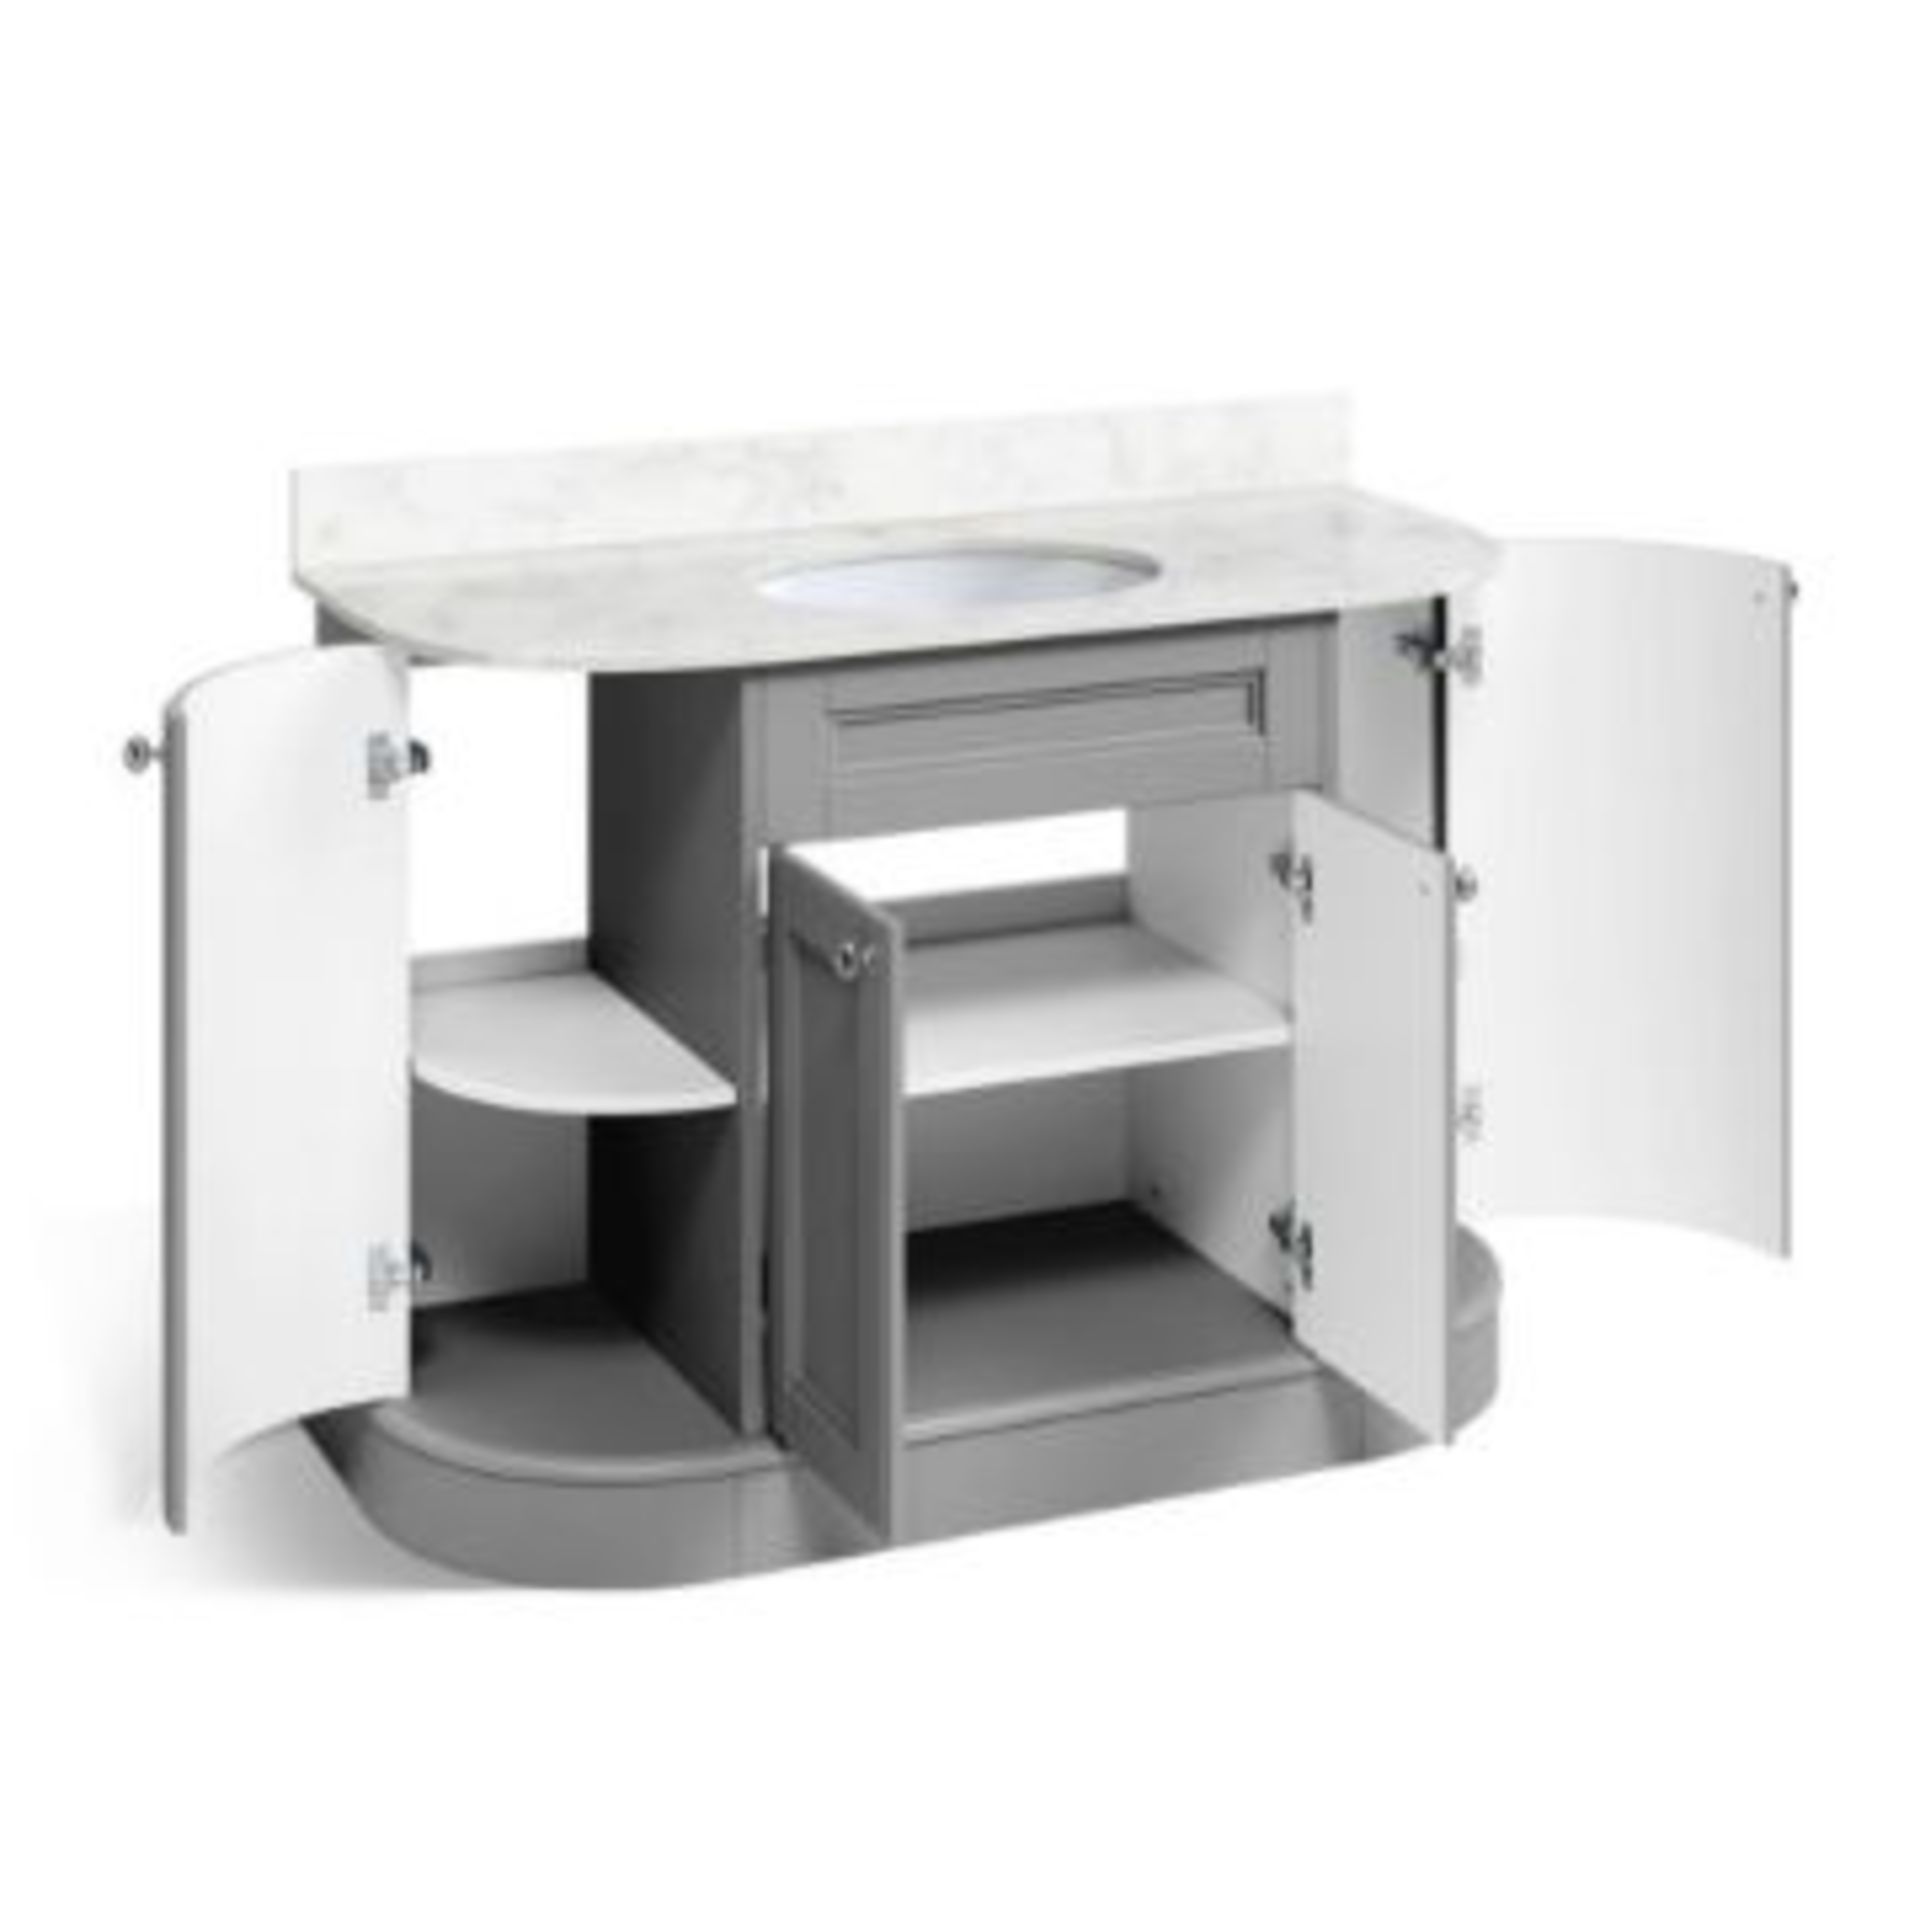 New & Boxed 1200mm York Earl Grey Marble Top Vanity Unit - 1200mm. RRP £3,499.Hcf06.Integrated... - Image 2 of 3